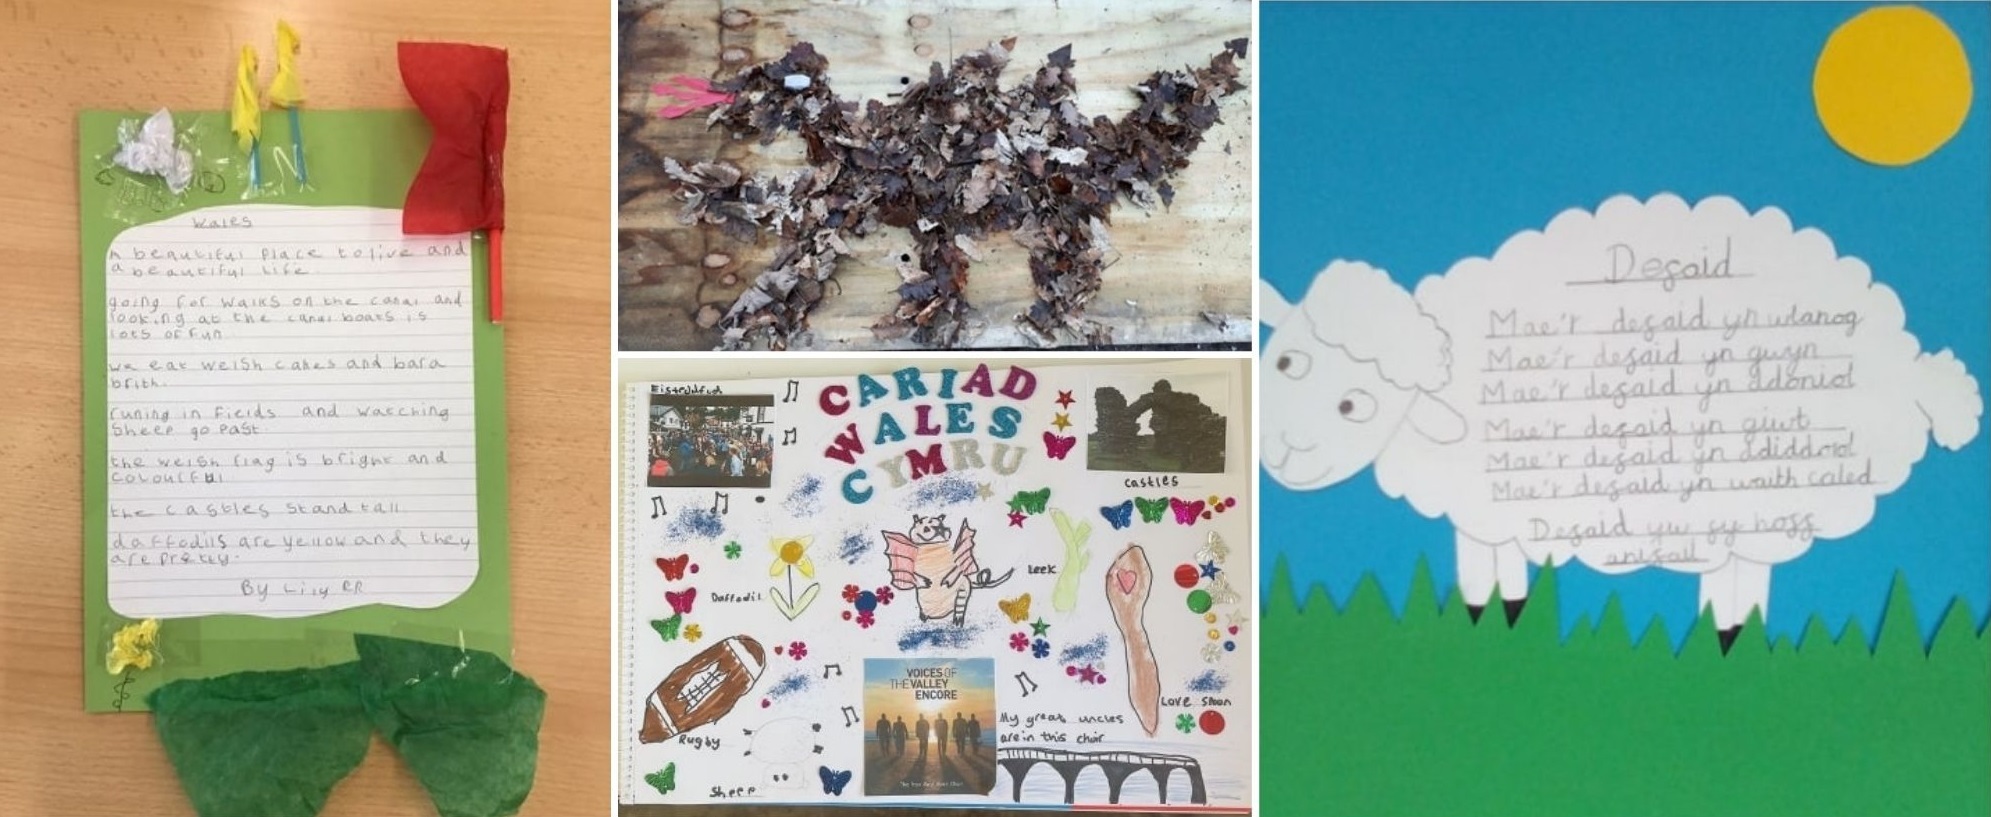 Some of the creative entries in the Dee Valley Federations virtual Eisteddfod.